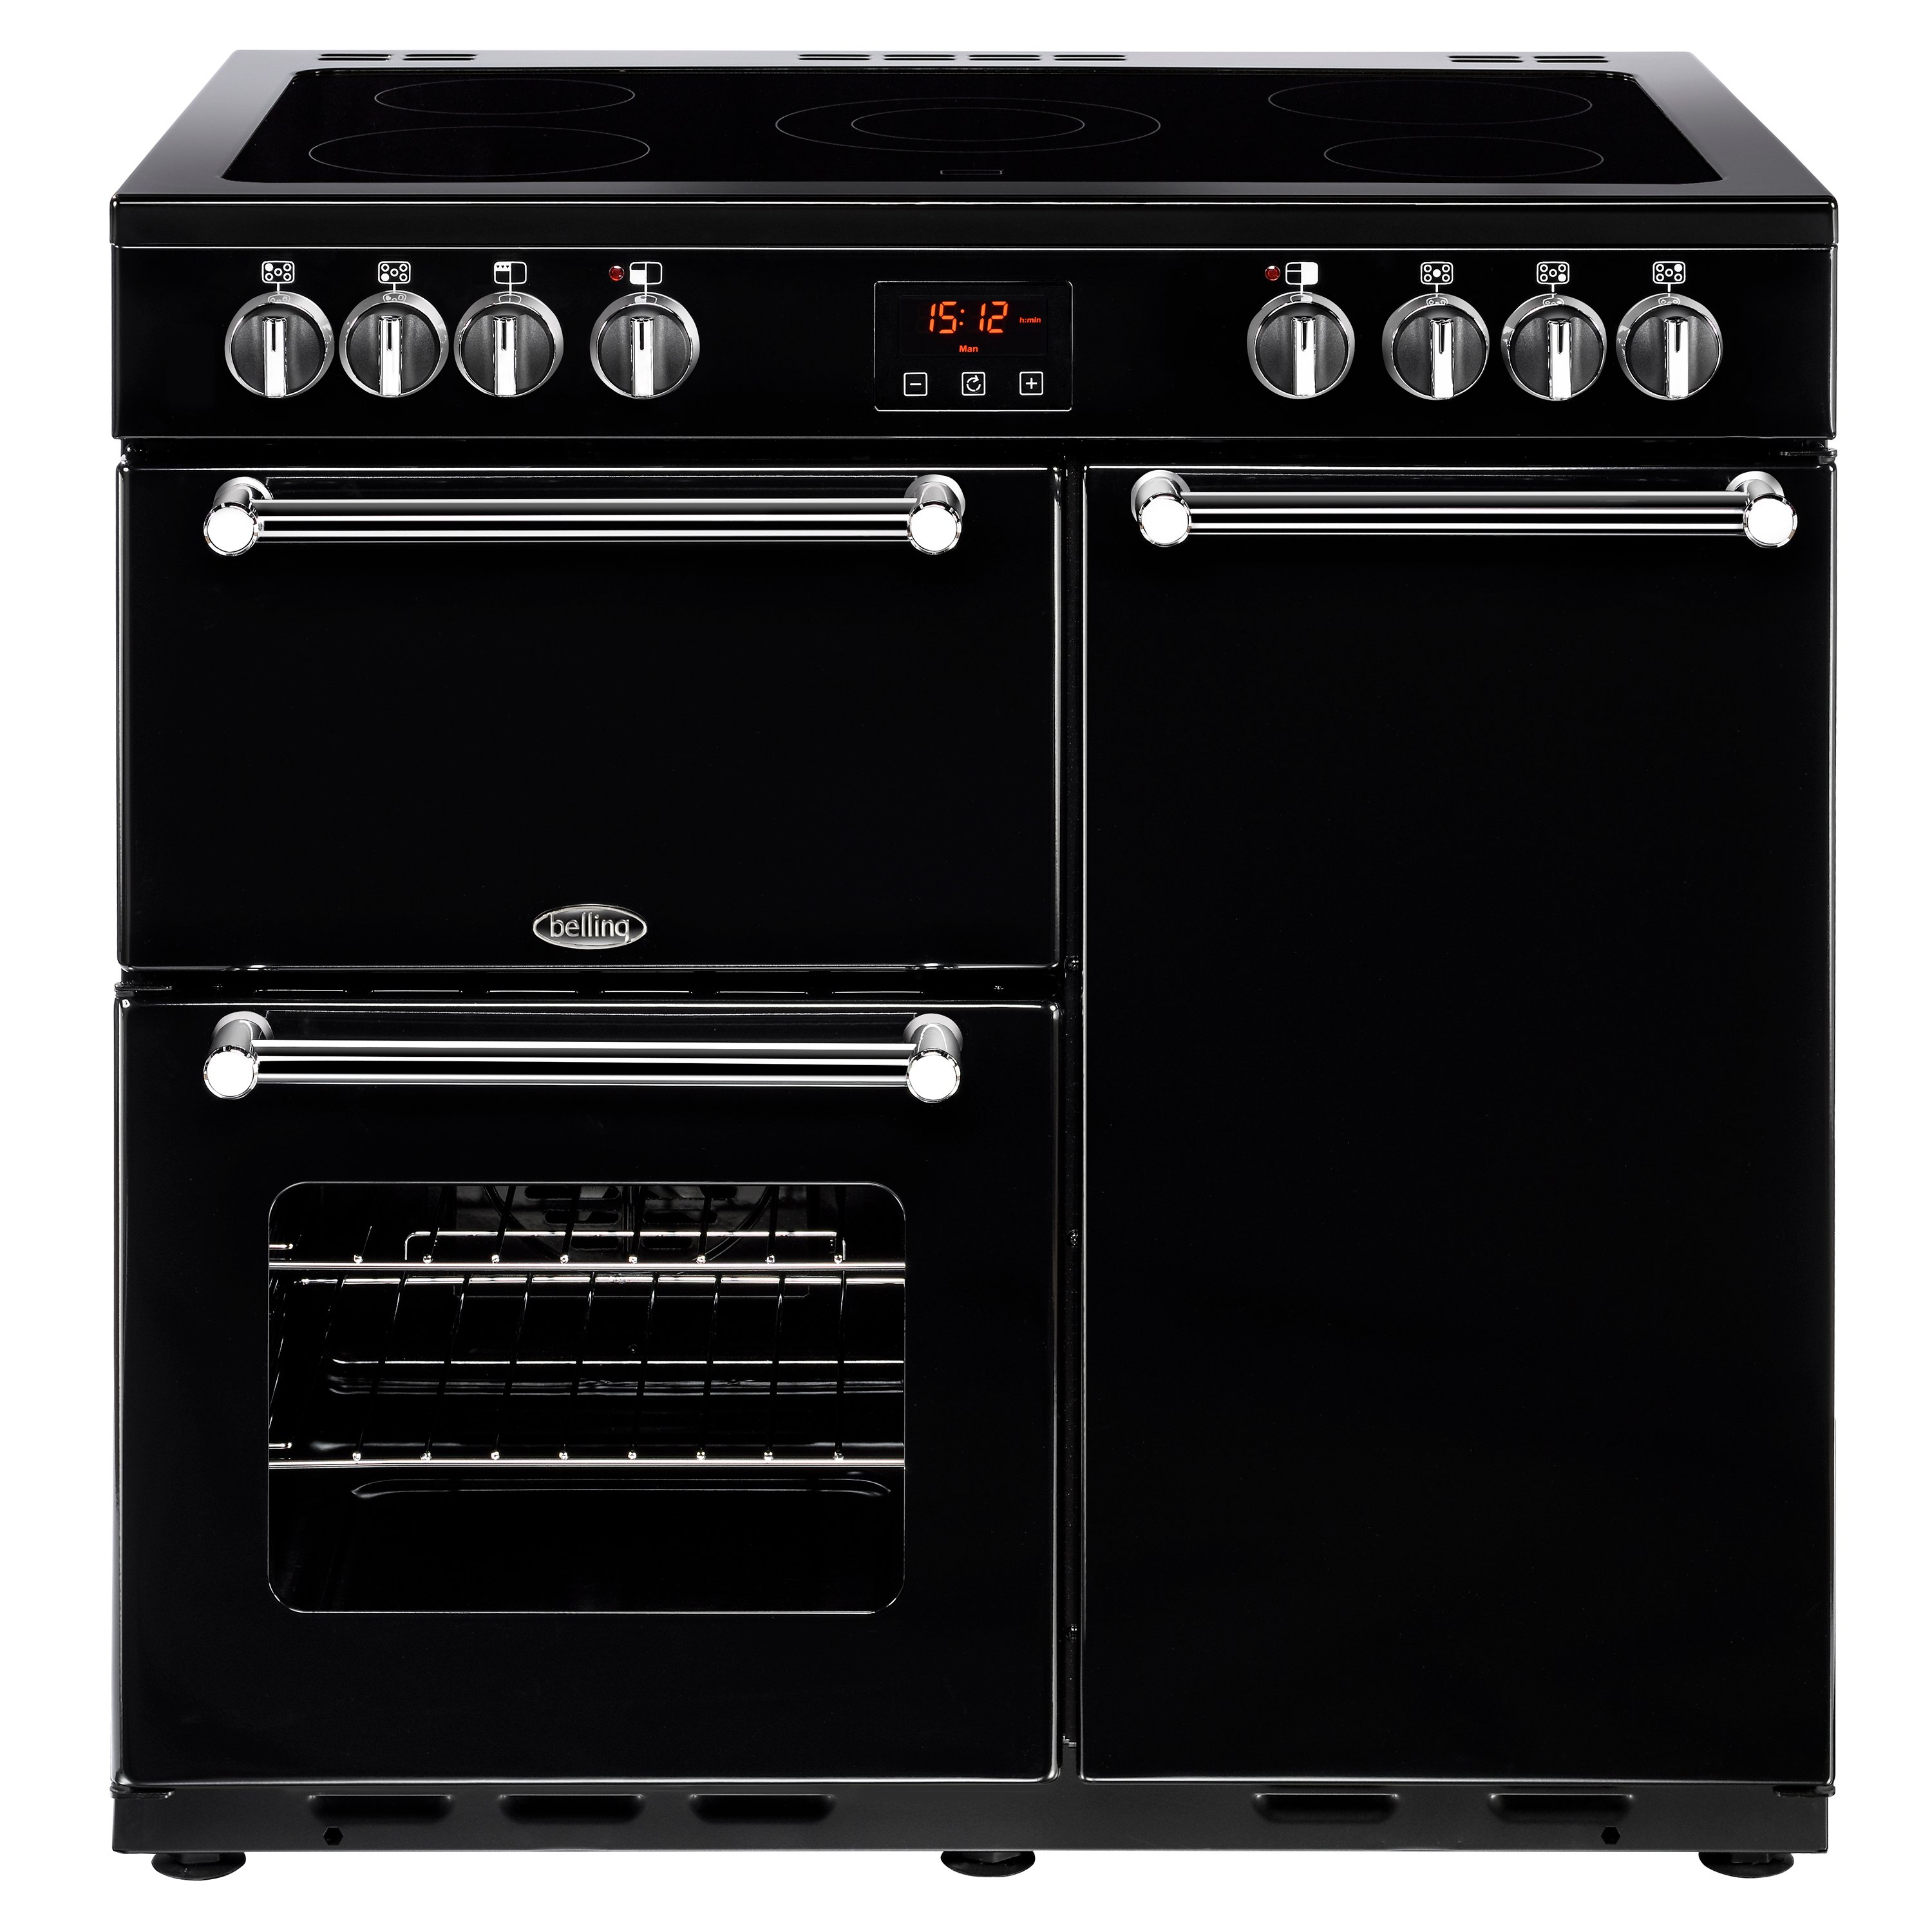 90cm electric range cooker with 5 zone ceramic hob, conventional oven & grill, fanned main oven and tall fanned oven.